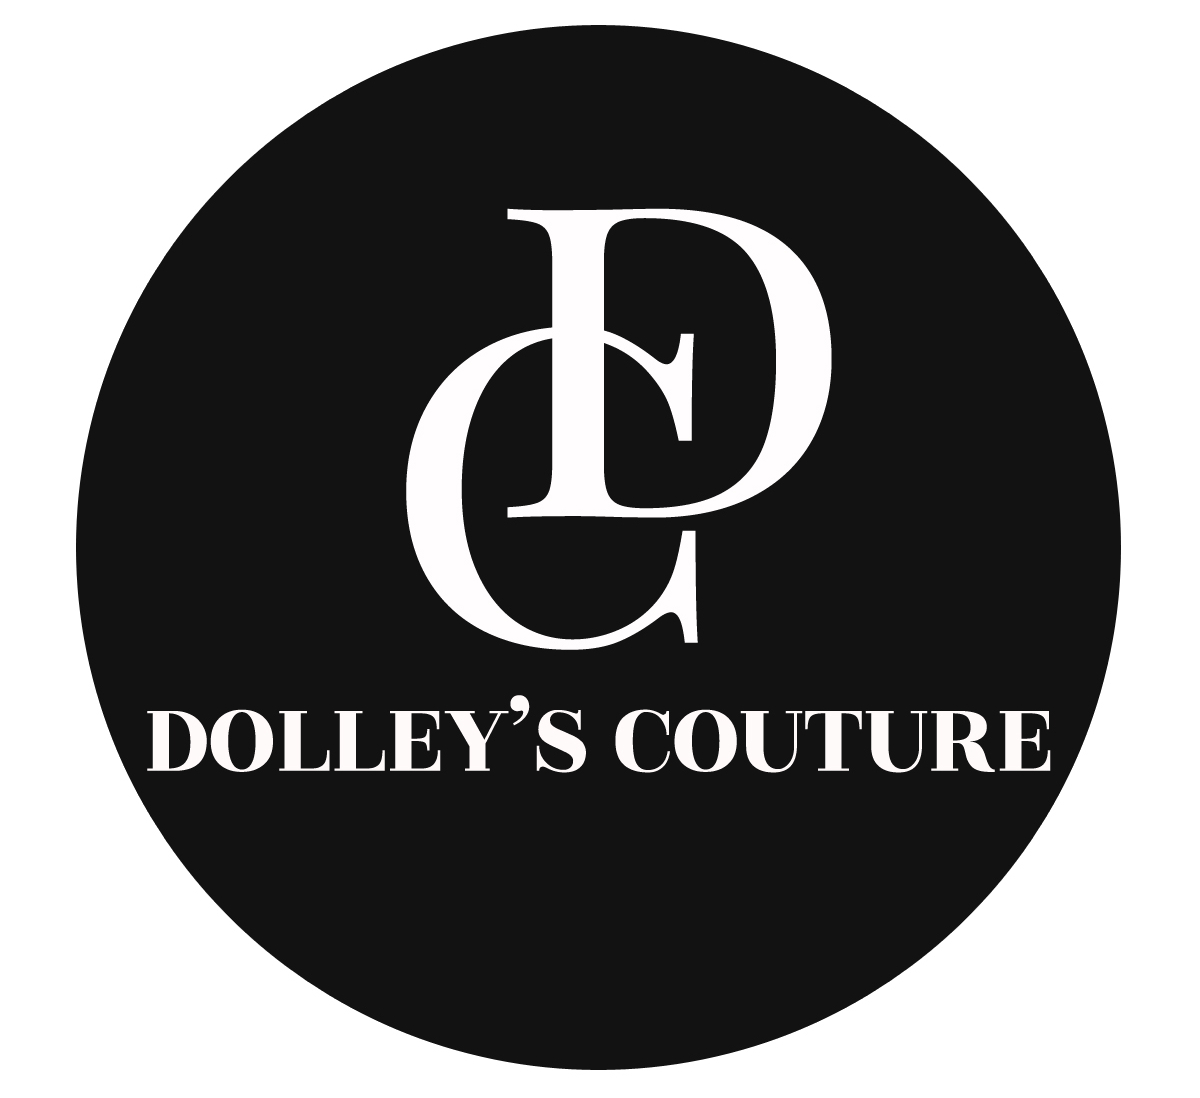 Dolleys Couture